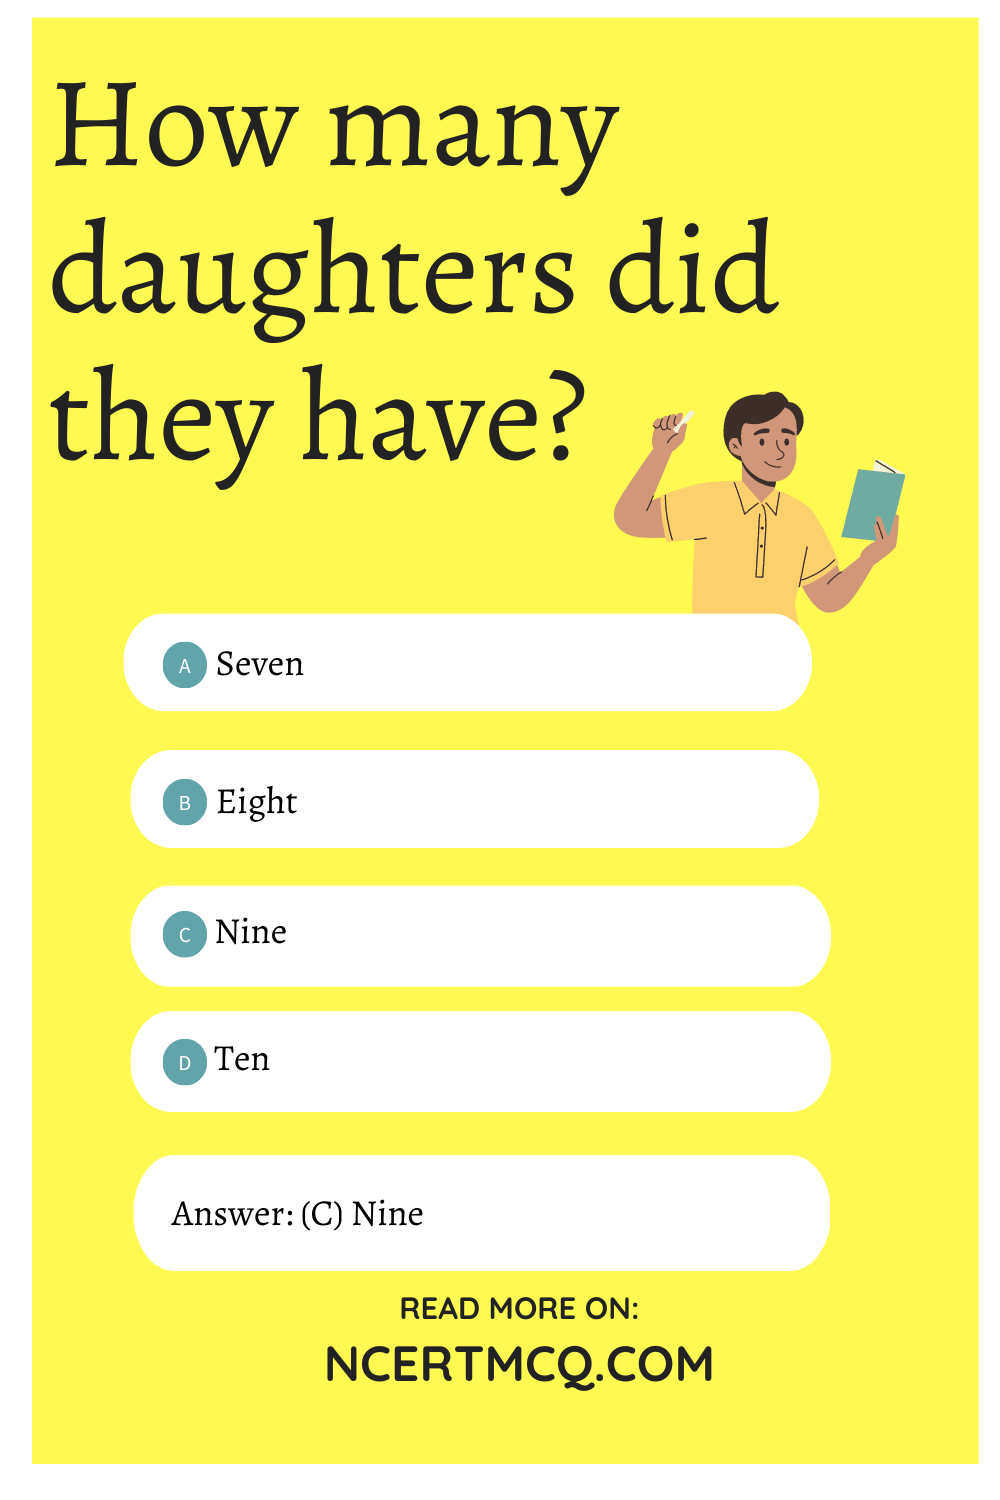 How many daughters did they have?